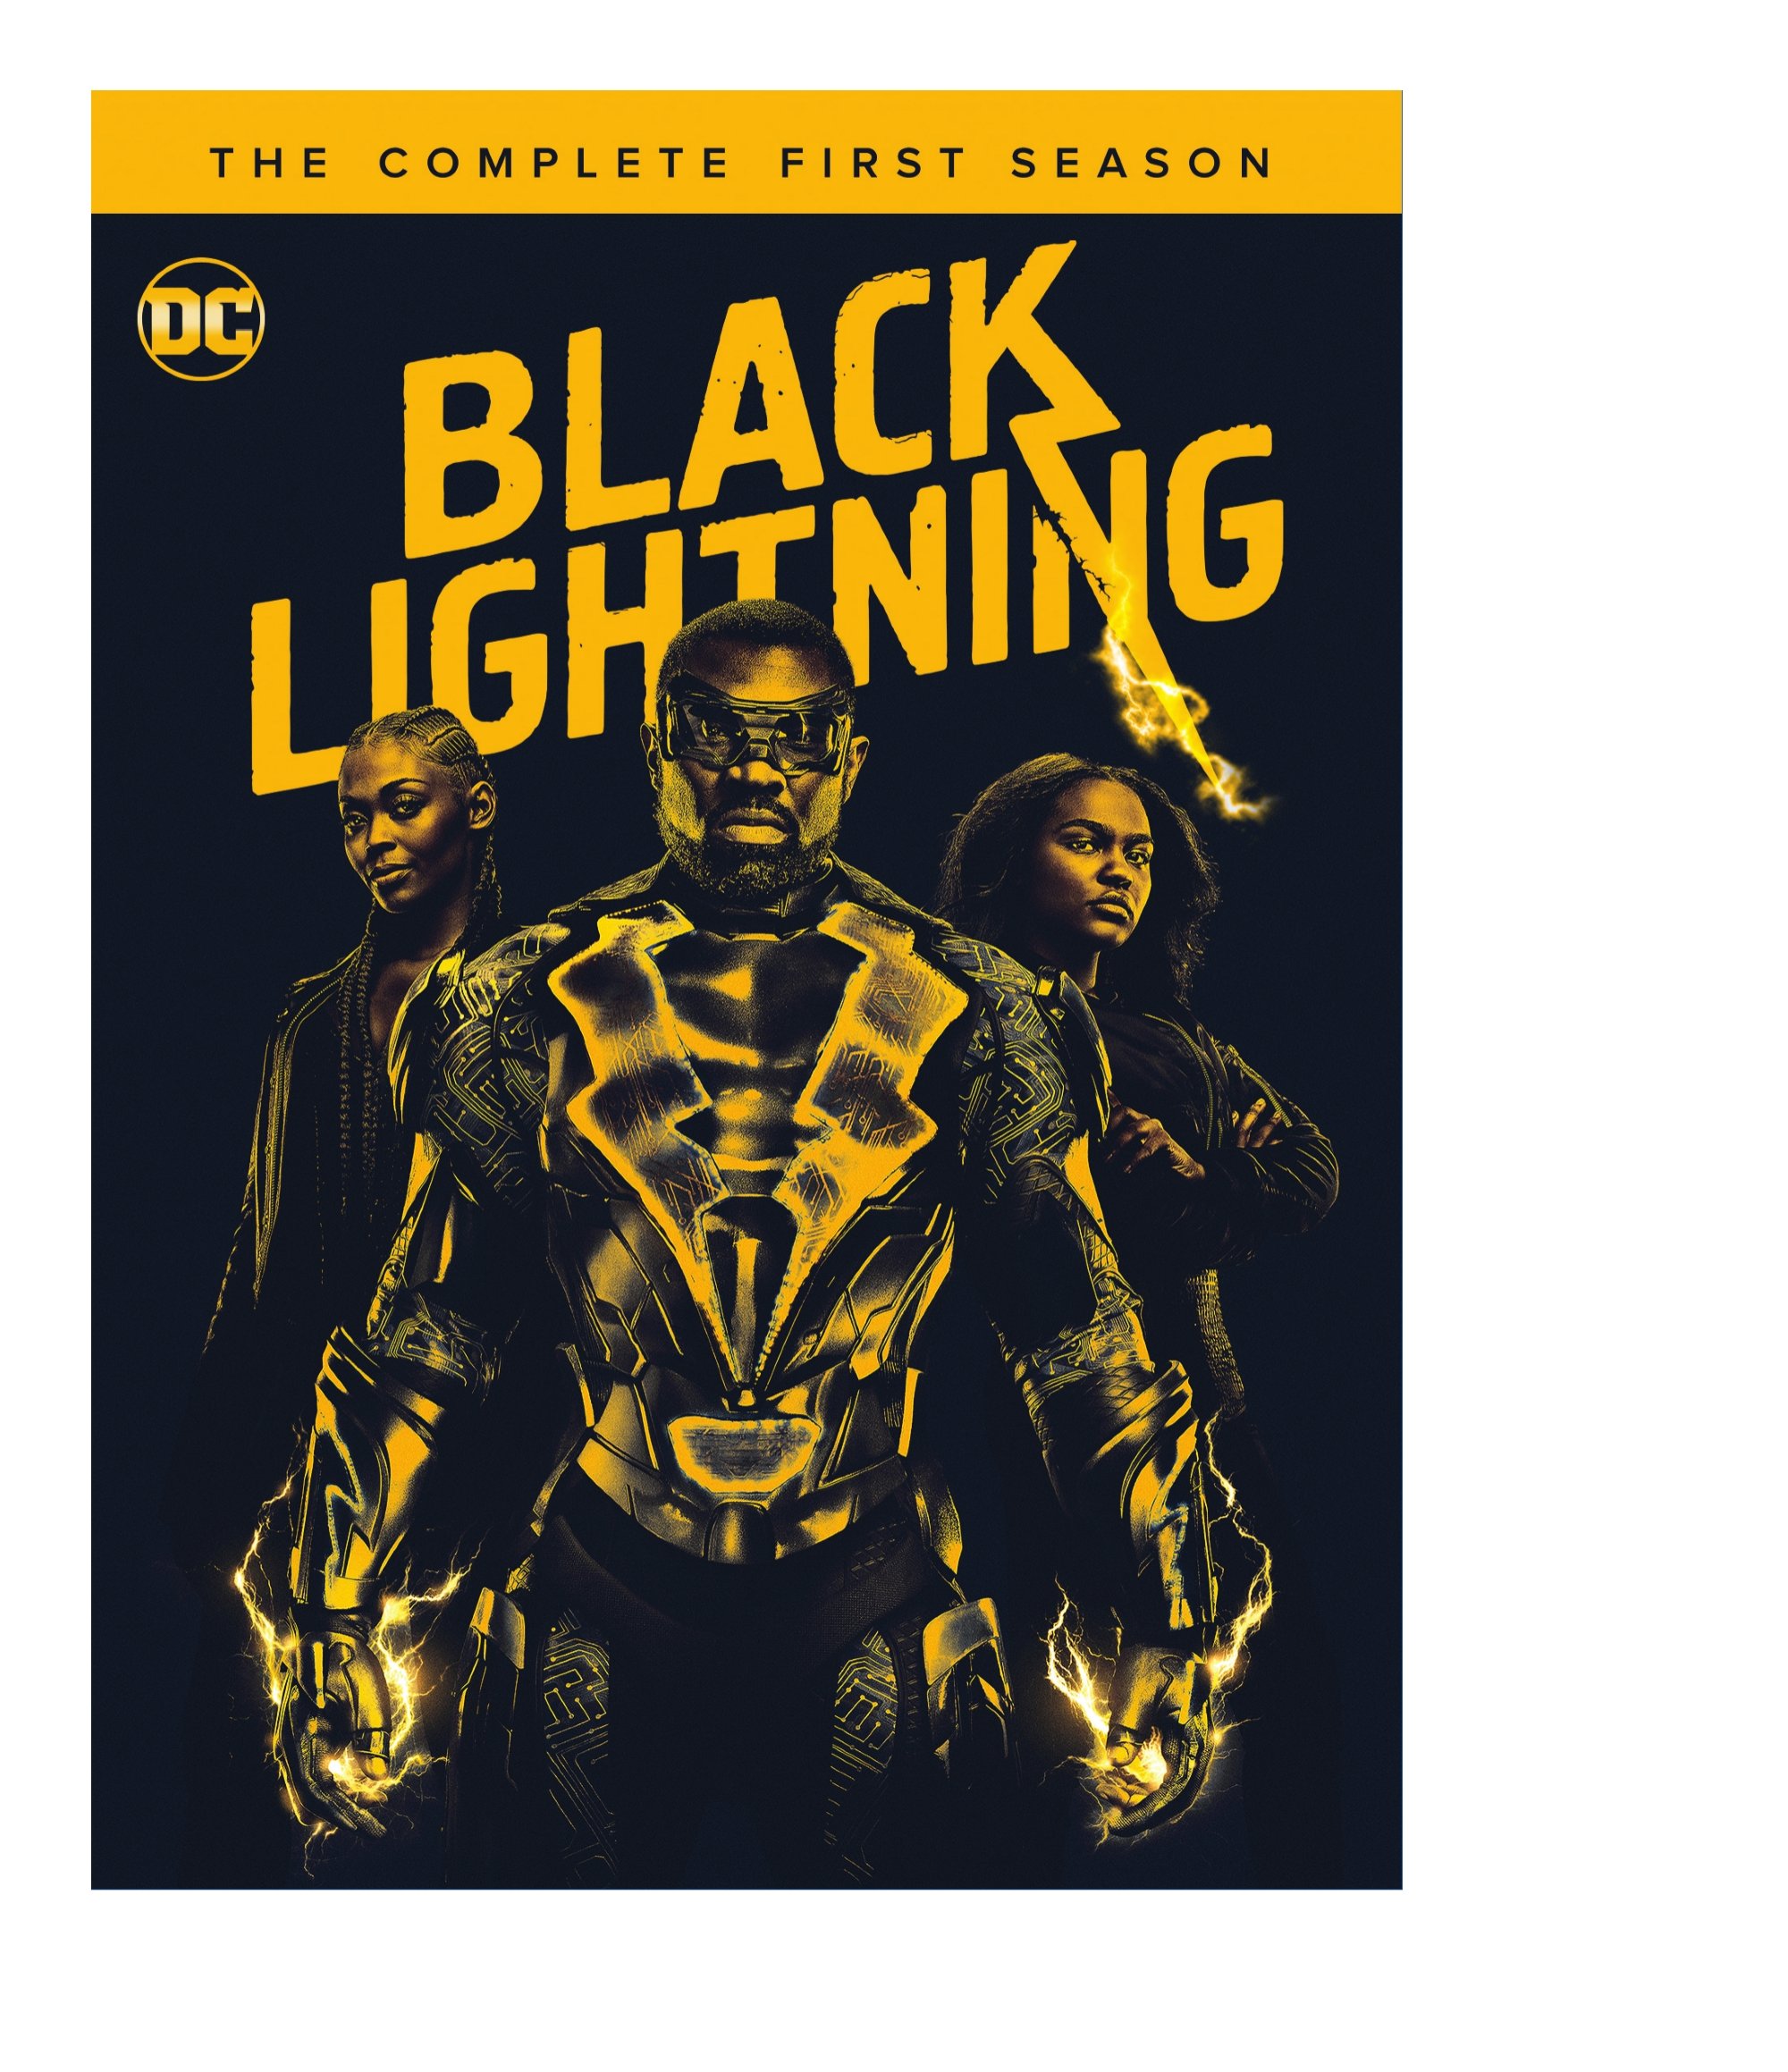 Black Lightning: The Complete First Season - DVD [ 2018 ]  - Sci Fi Television On DVD - TV Shows On GRUV